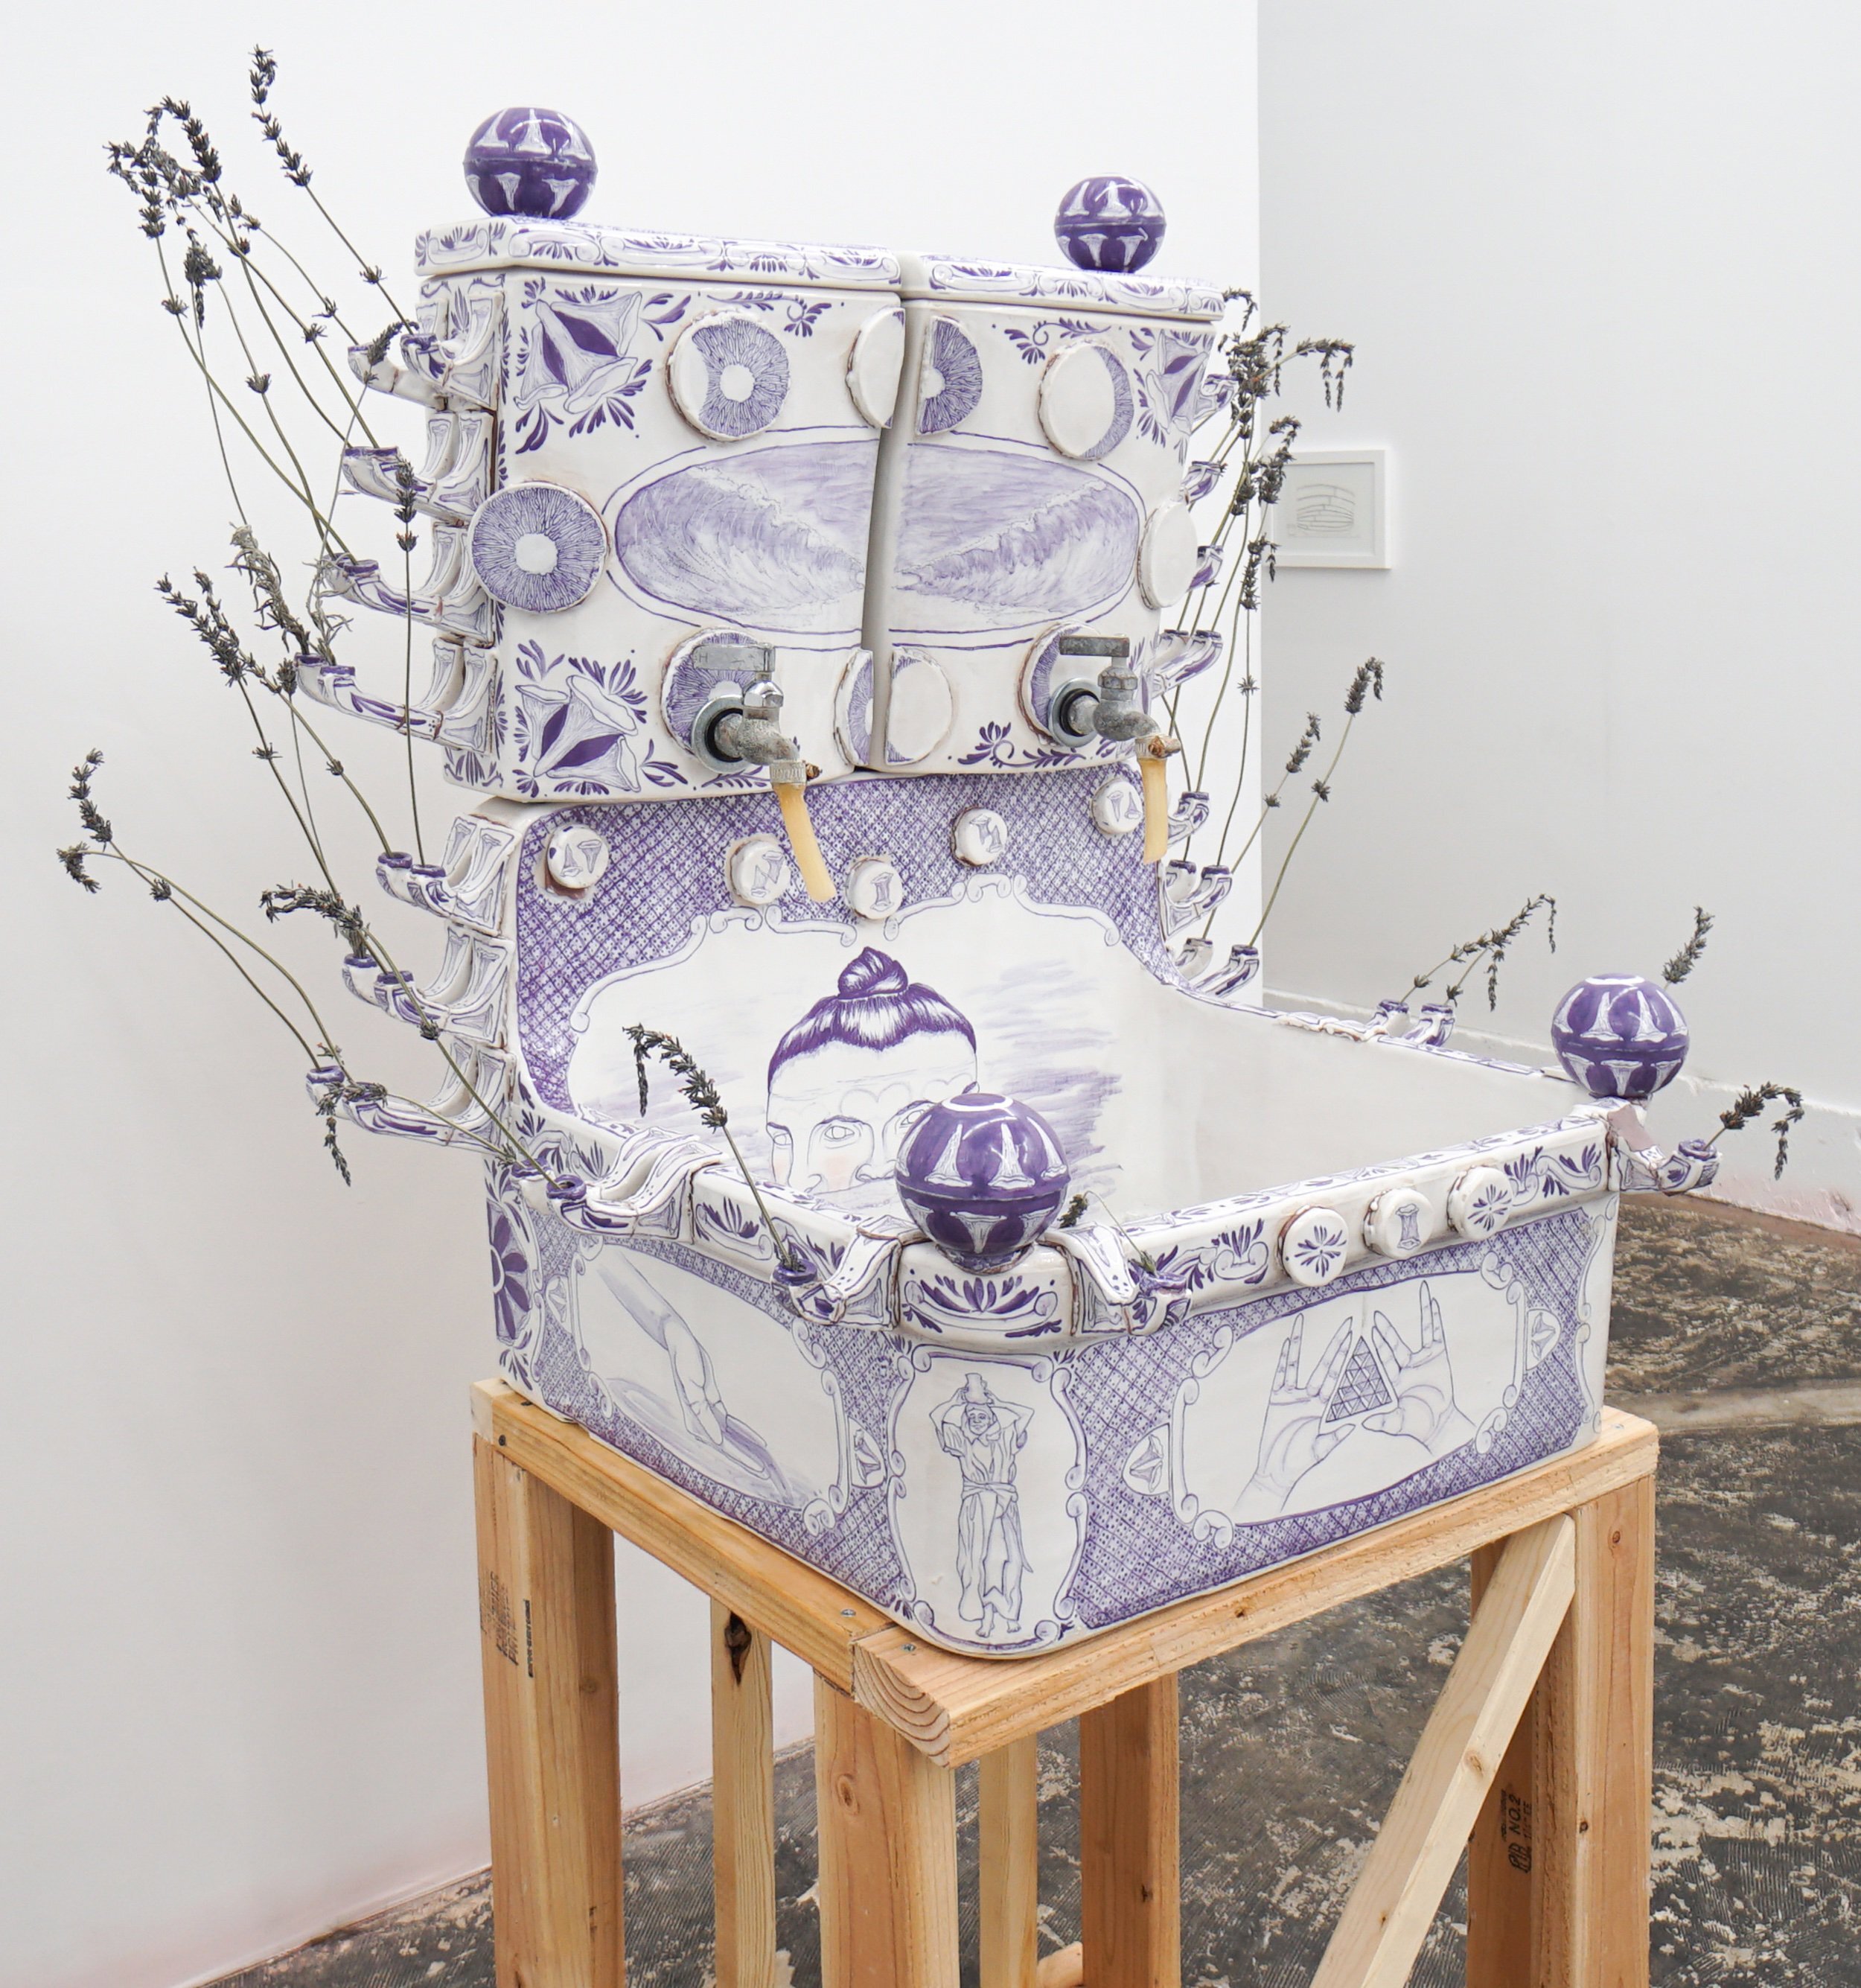  Nicki Green   Splitting/Unifying (toilet tanks, slip spigots, and medical sink laver with faucets) , 2019  Glazed vitreous china with epoxy and found slip spigots  54 x 40 x 36 inches 